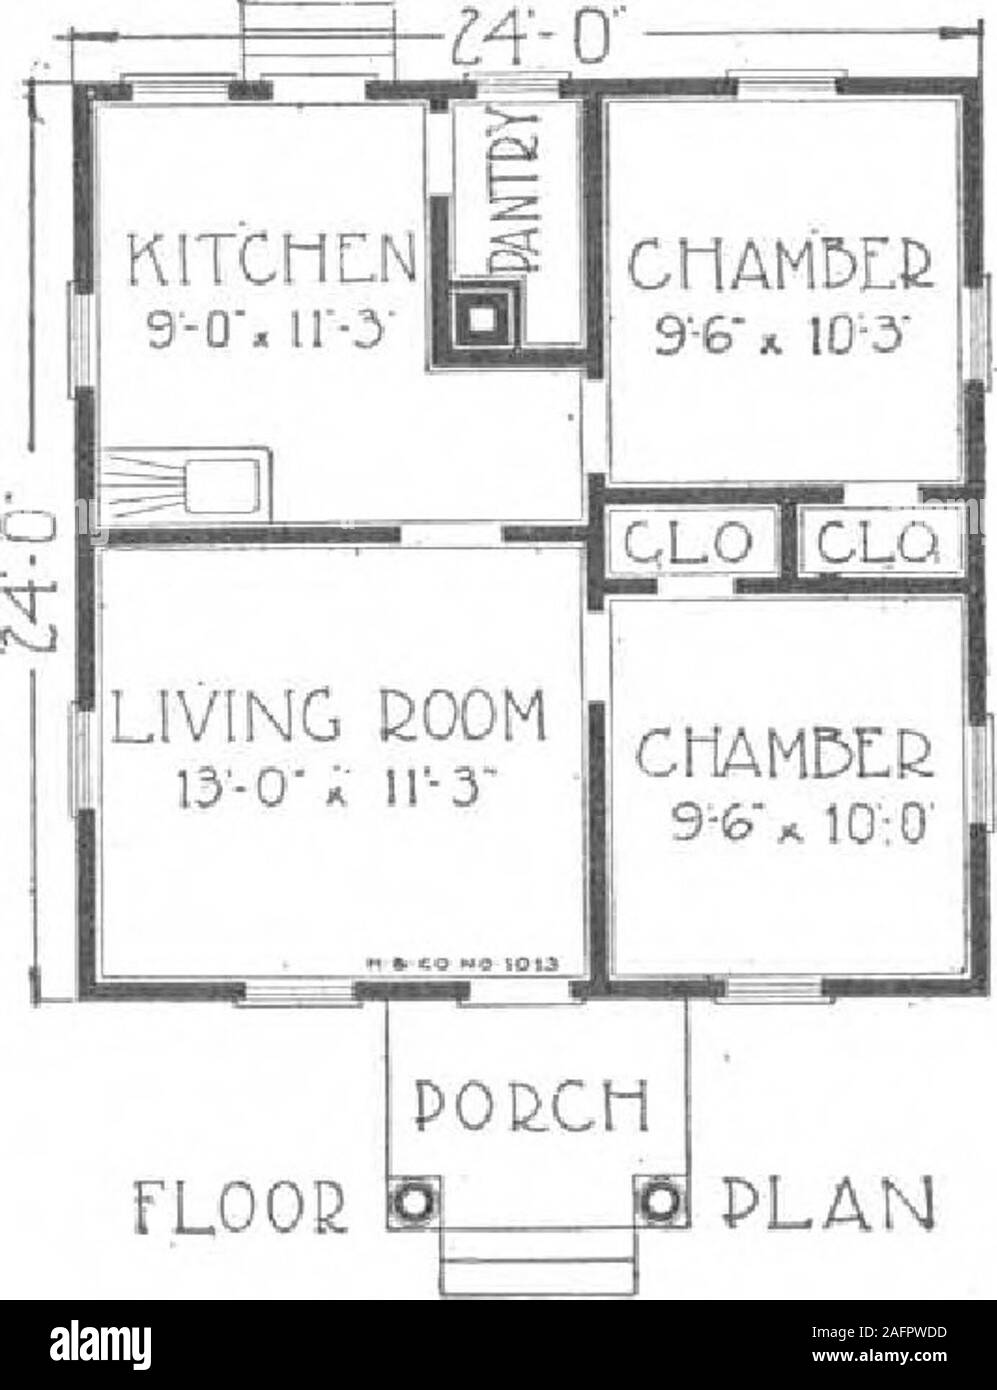 . A plan book of Harris homes. POUCtt FLOOR PLANNo. 1015 FLOOEL PLANNo. 1014. FL0OE PLAN No. 1013 HARRIS RROTHERS COMPANY, 35th and Iron Streets, CHICAGO, ILLINOIS Page 73 Stock Photo